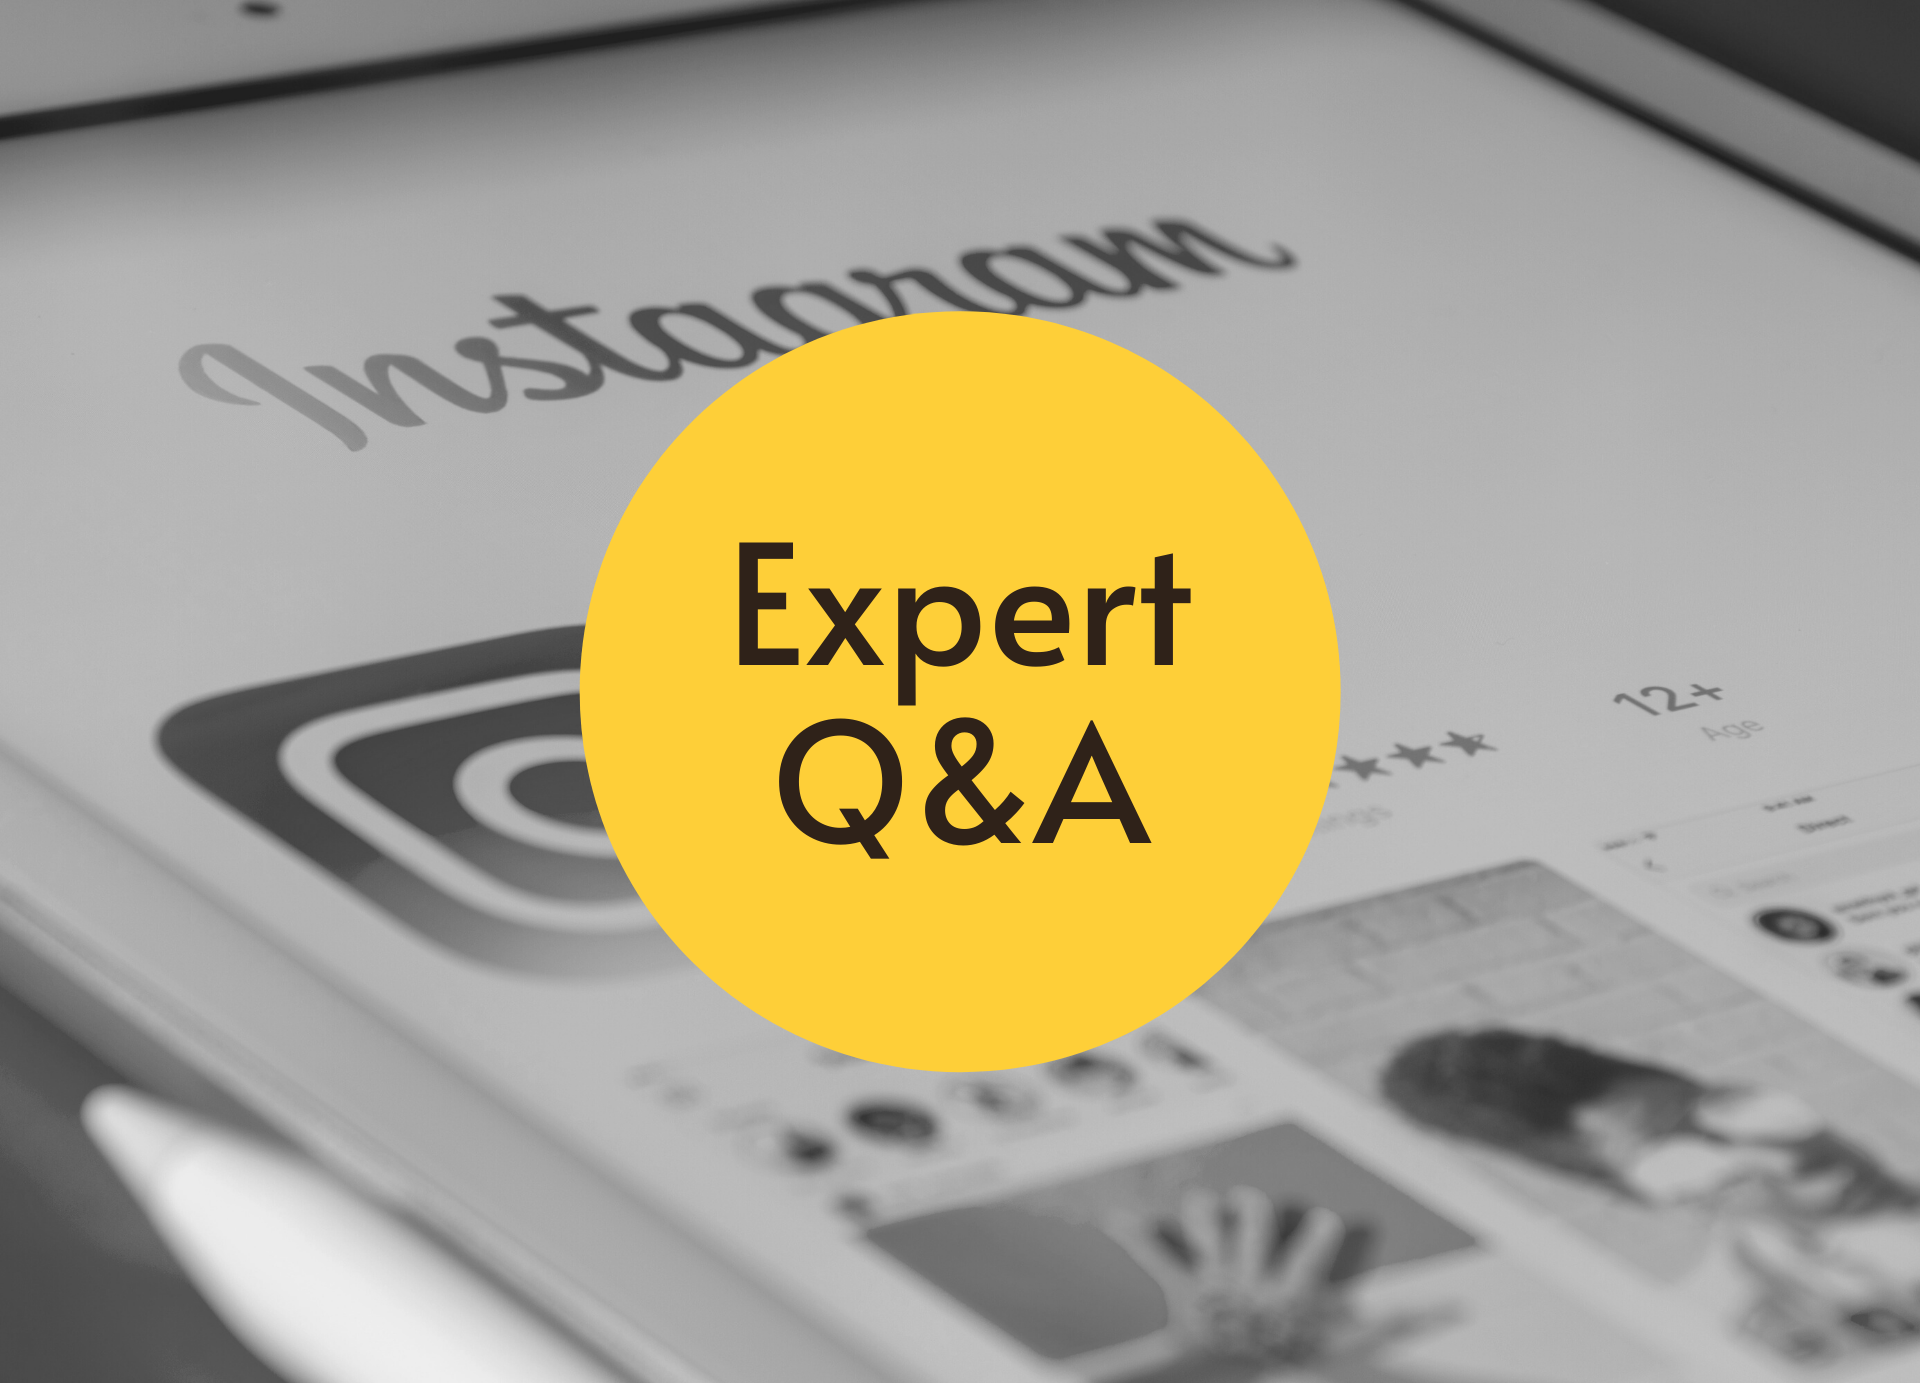 An Instagram screen with the words "Expert Q&A" superimposed on a yellow circle